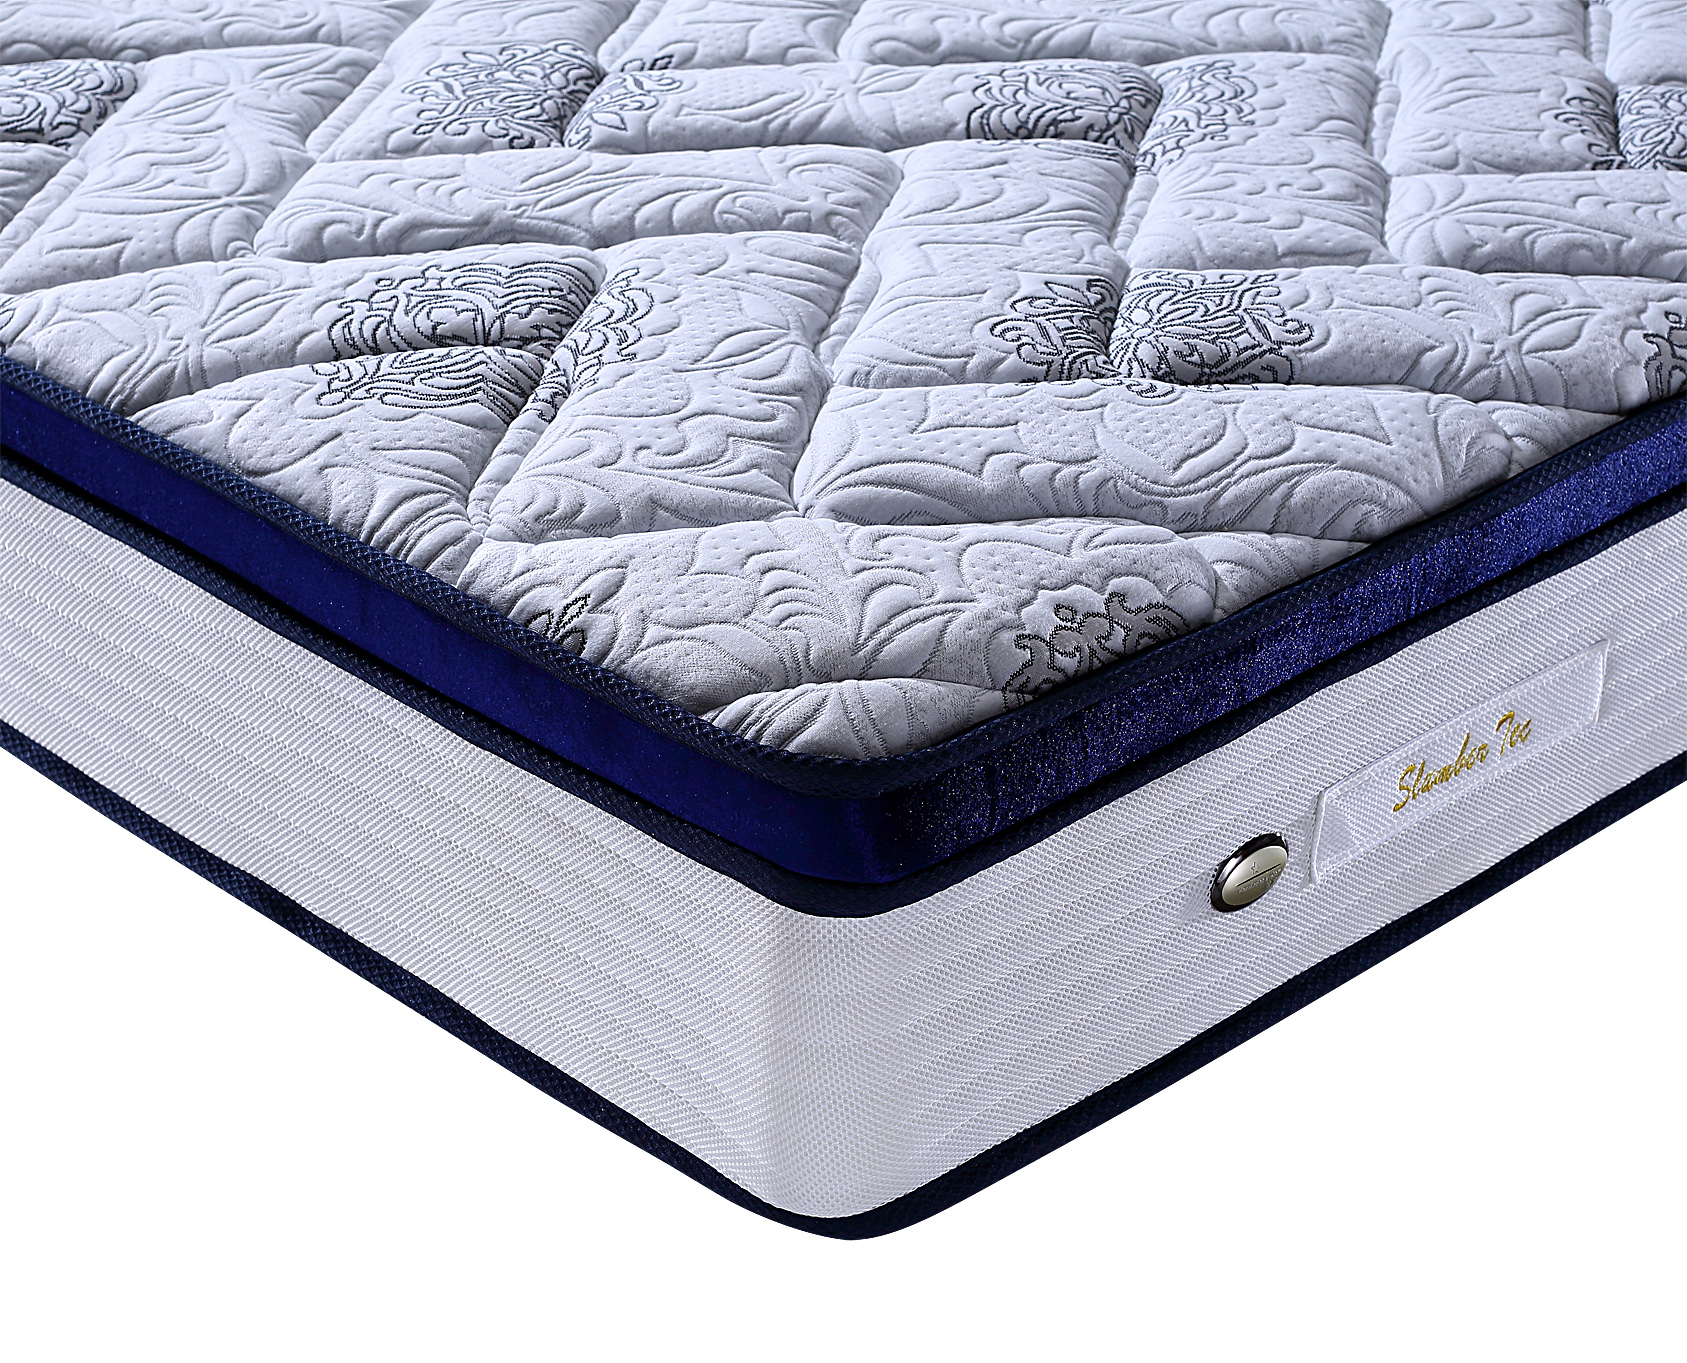 sales direct mattress and furniture